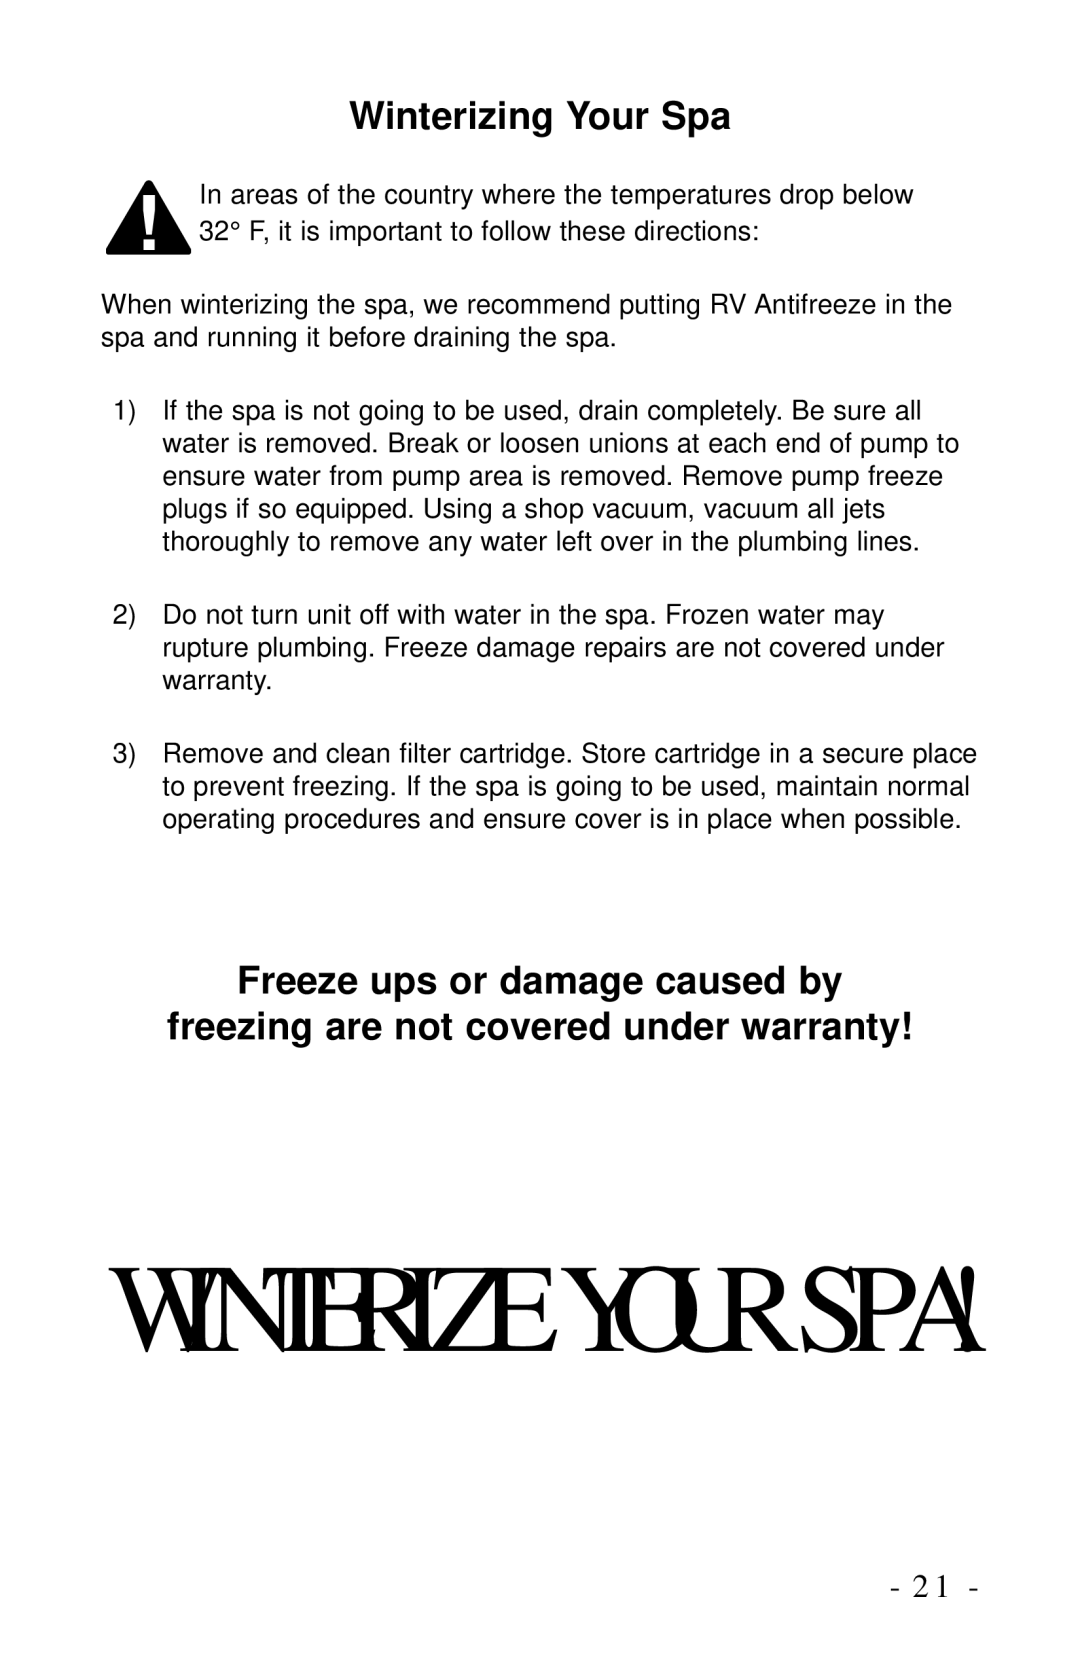 Dynasty Spas 2006 owner manual Winterize Your Spa, Winterizing Your Spa, Freeze ups or damage caused by 